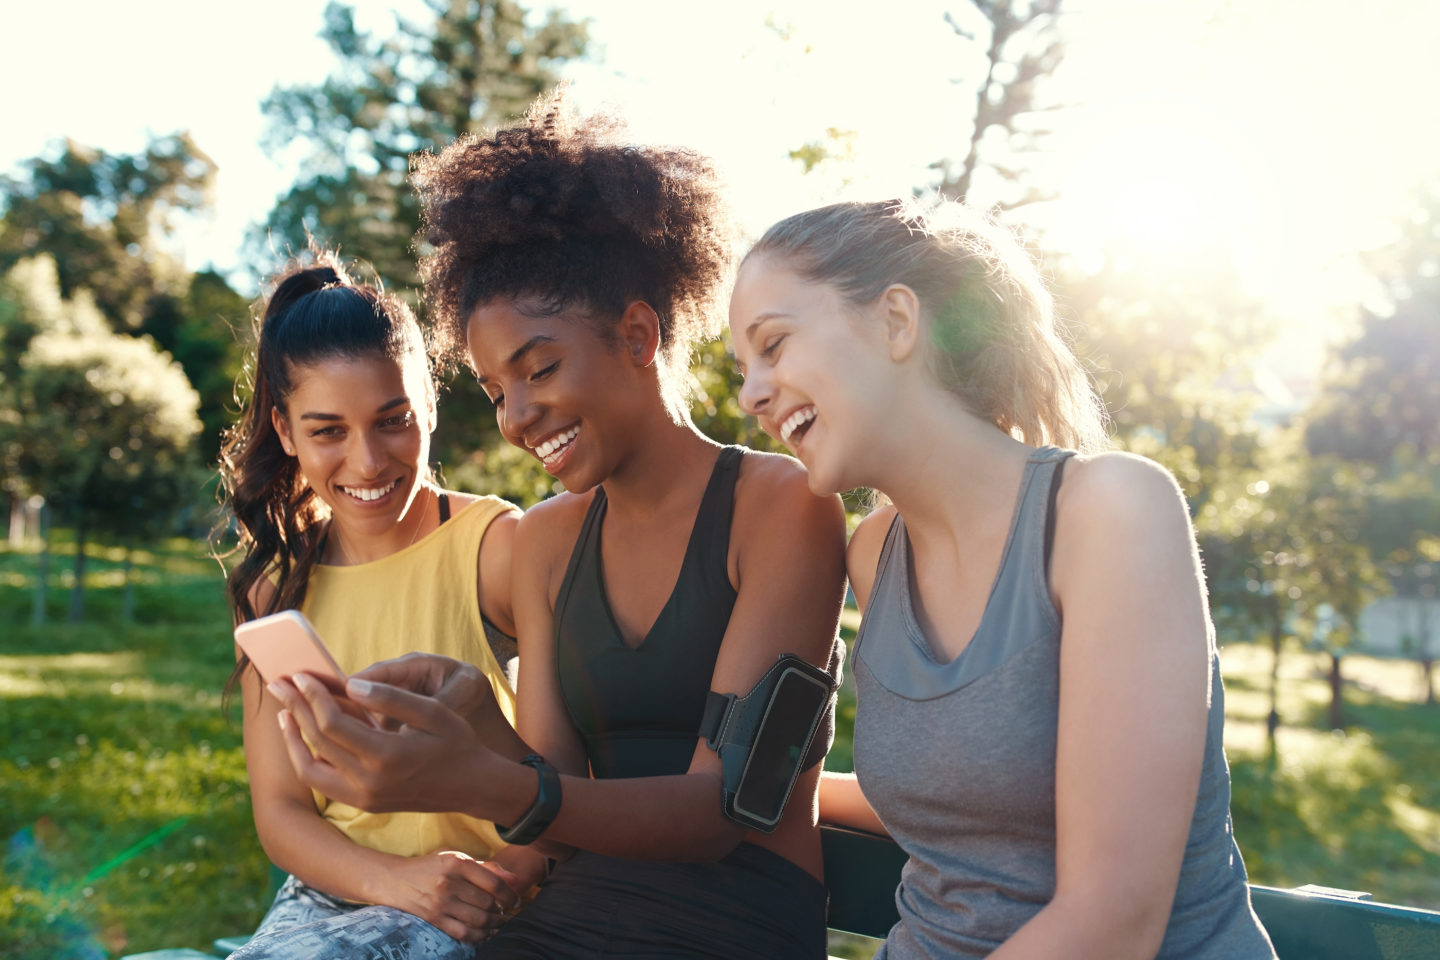 Smiling female diverse friends looking at mobile phone smiling and having fun in the morning at the park - friends laughing together